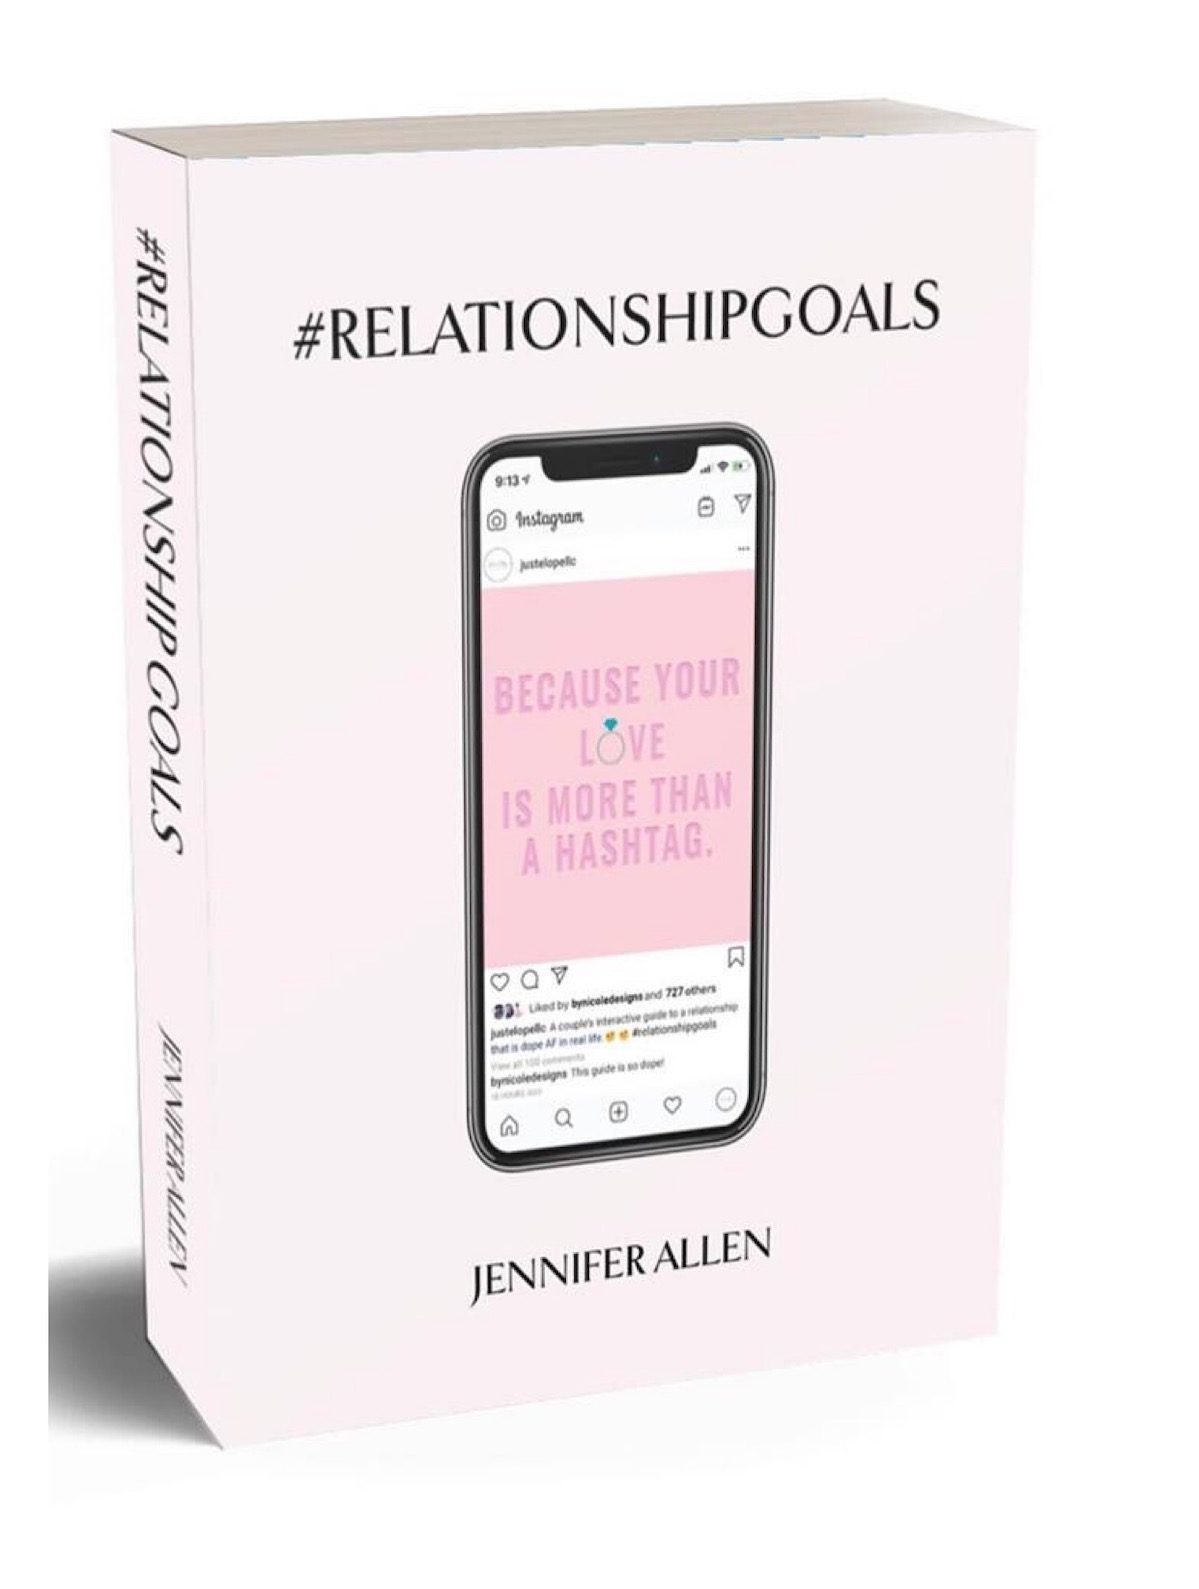 Love Is Blind Officiant and CEO of Just Elope, Jennifer Allen, releases her new workbook: #RELATIONSHIPGOALS